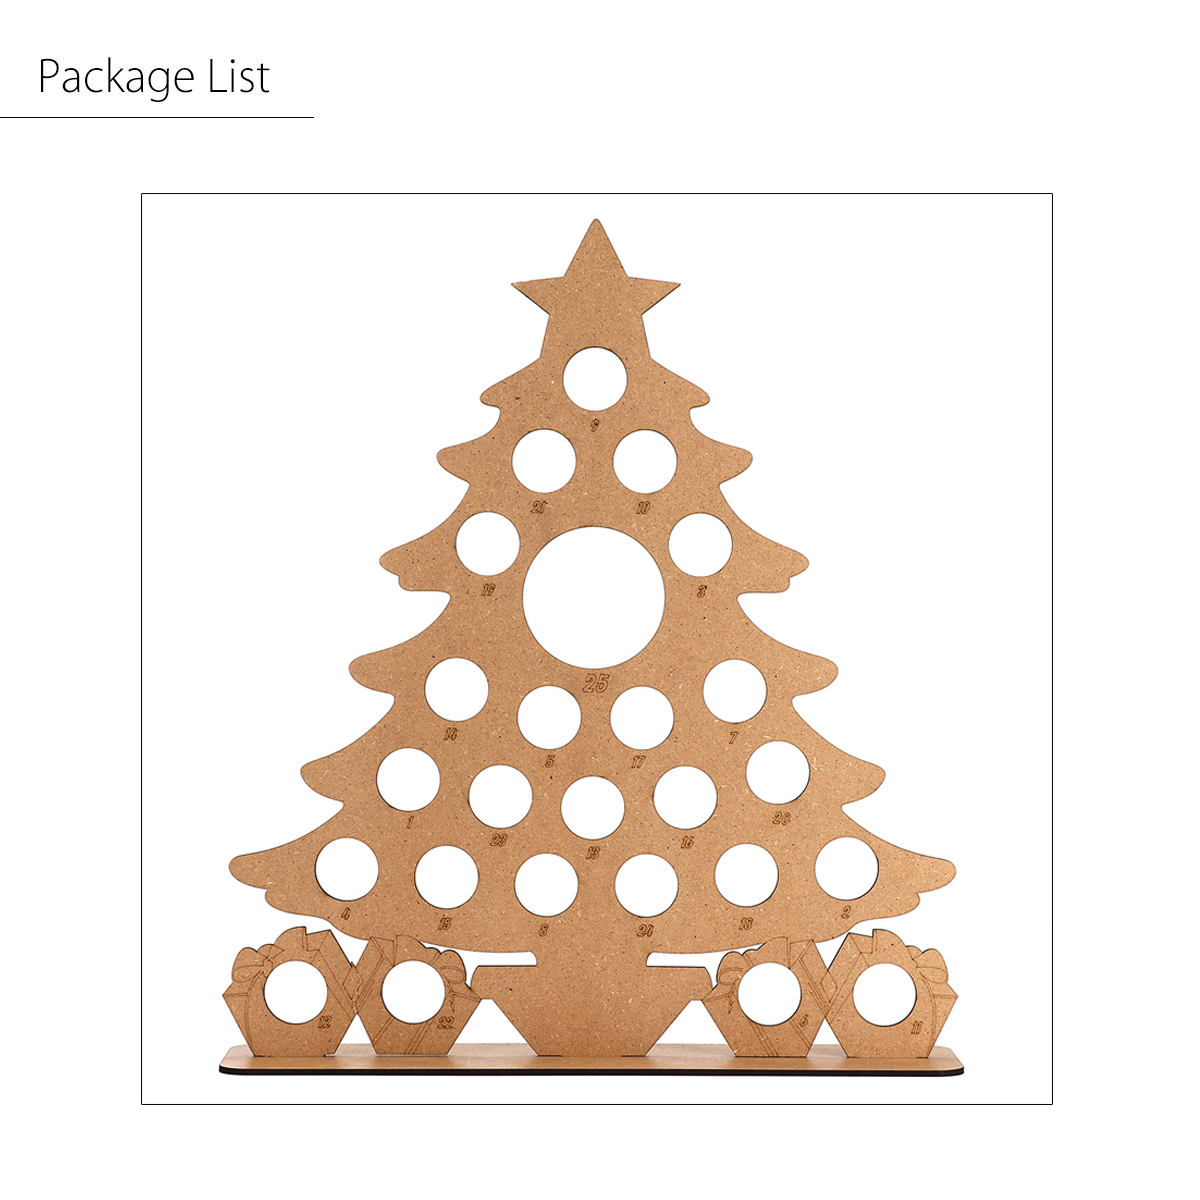 Wooden-Christmas-Advent-Calendar-Christmas-Tree-Decoration-Fits-25-Circular-Chocolates-Candy-Stand-R-1587861-5